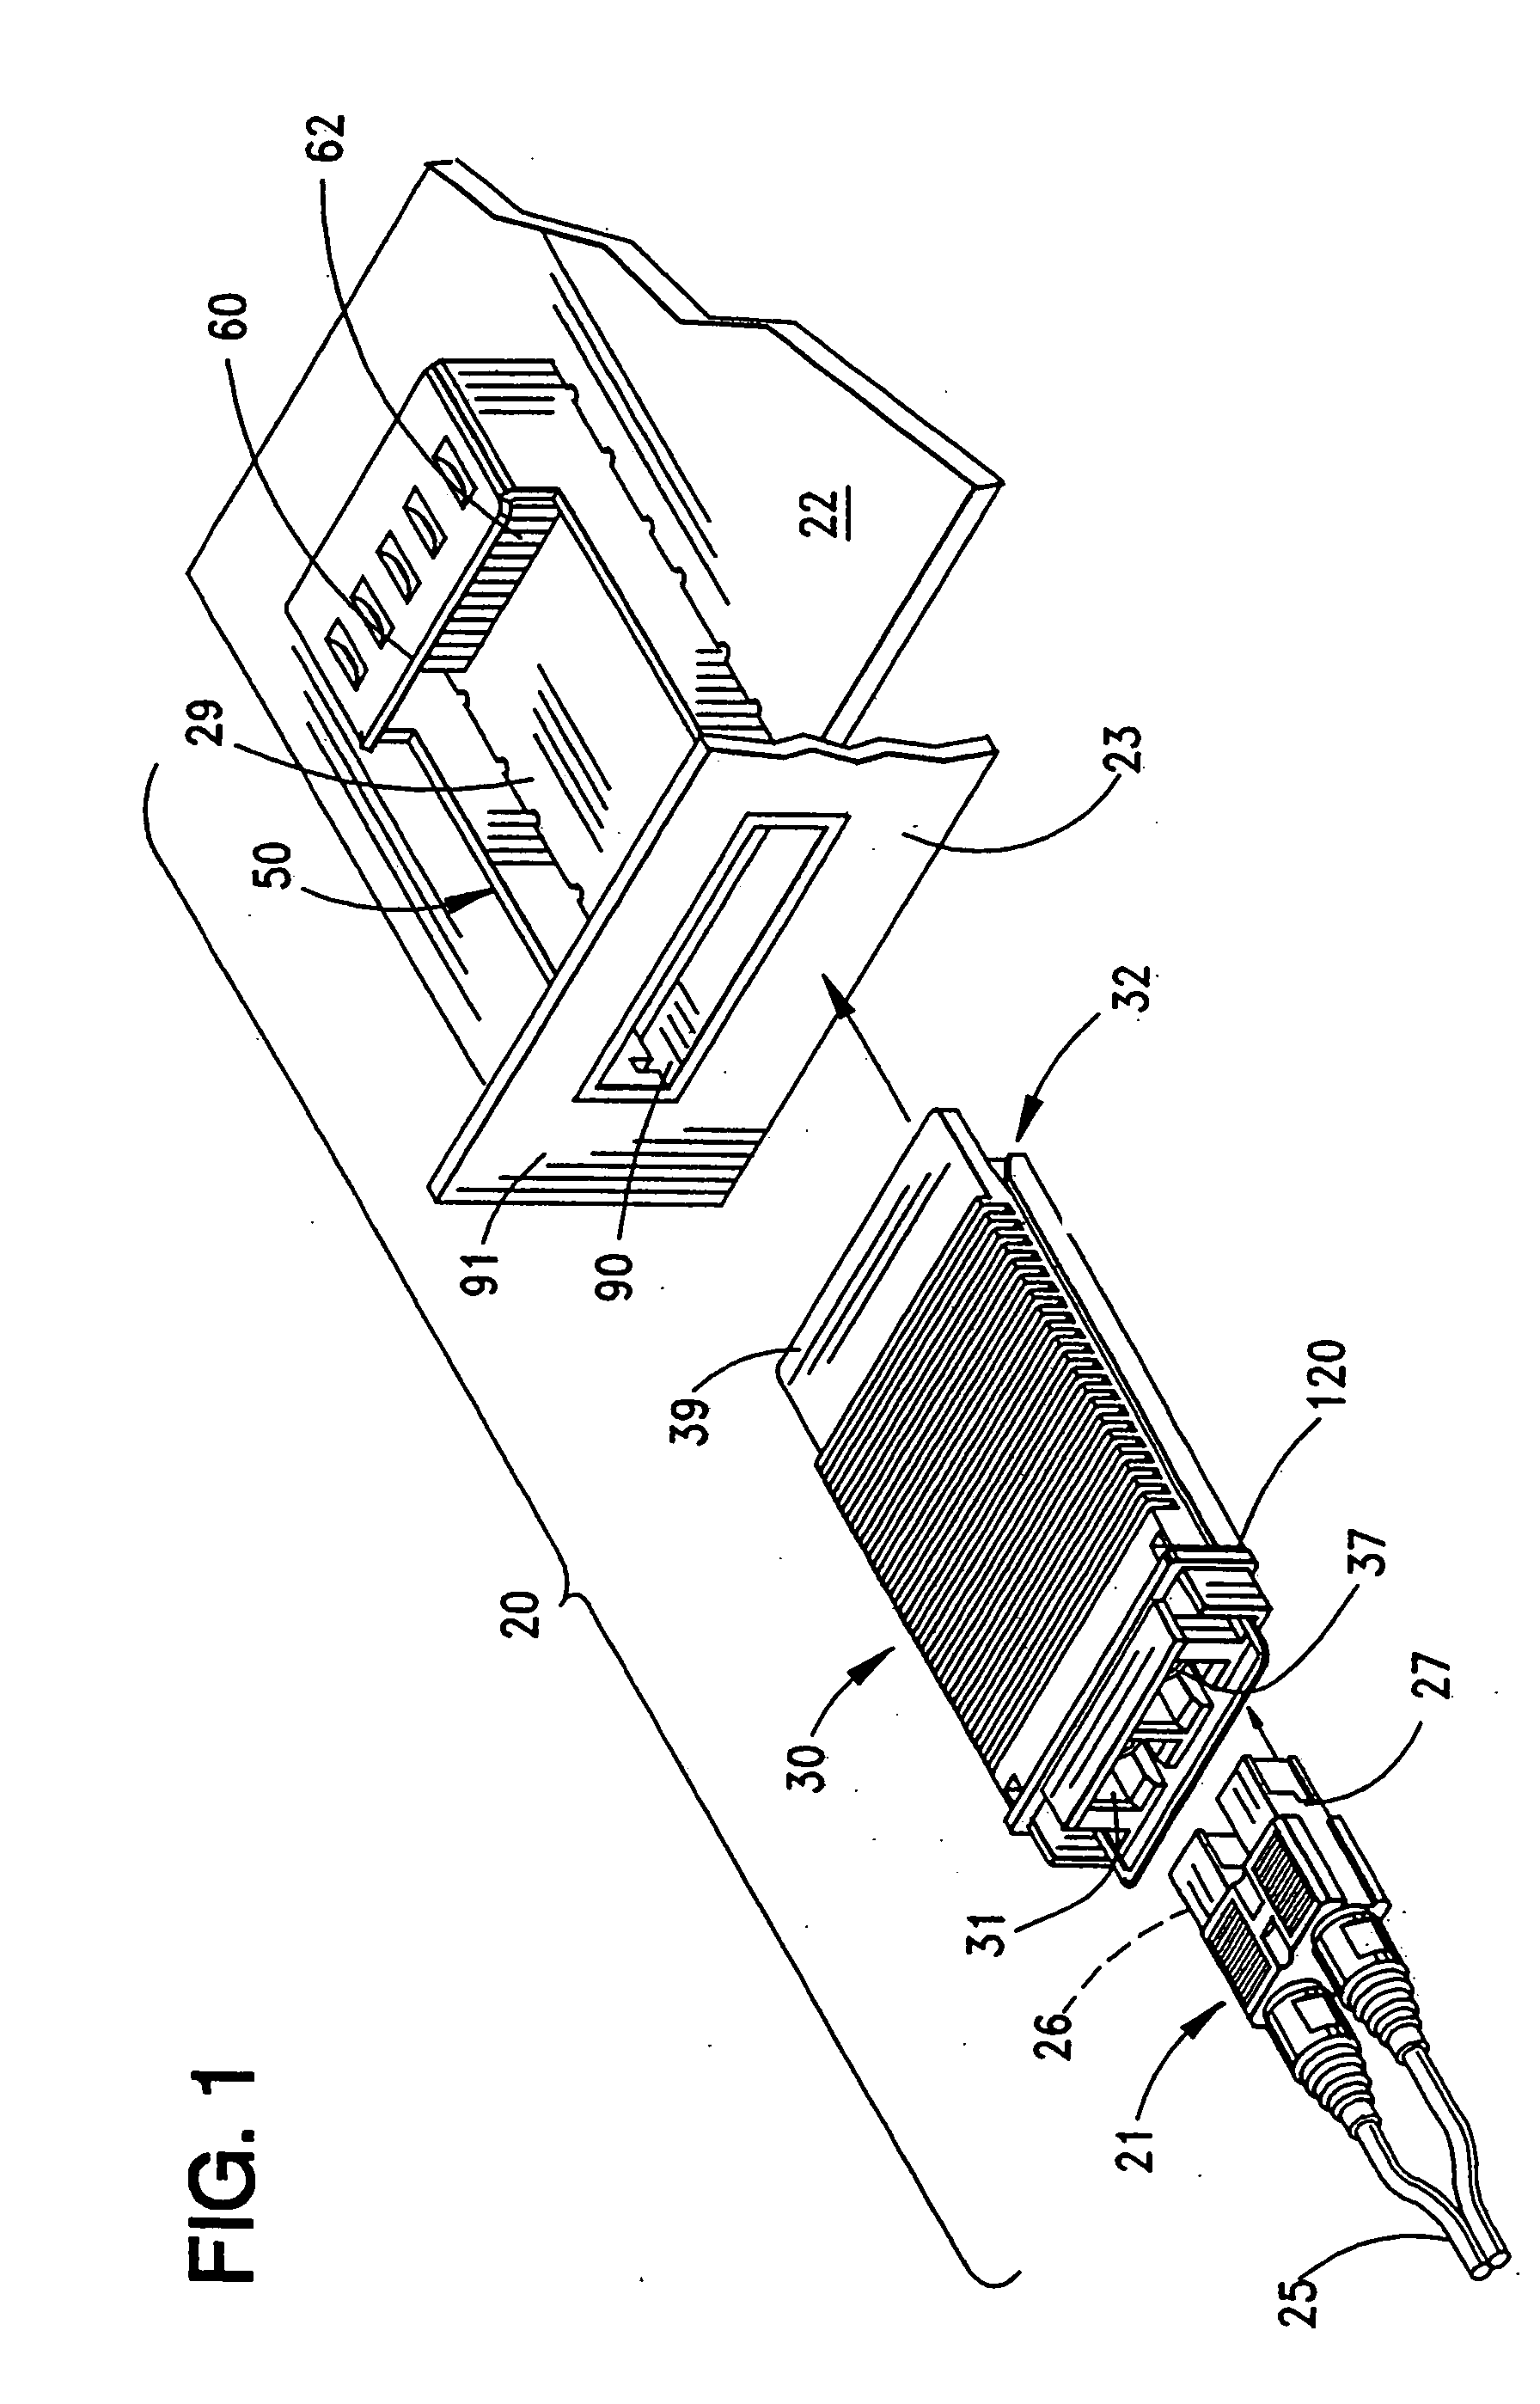 Adapter module with insertion guide aspect